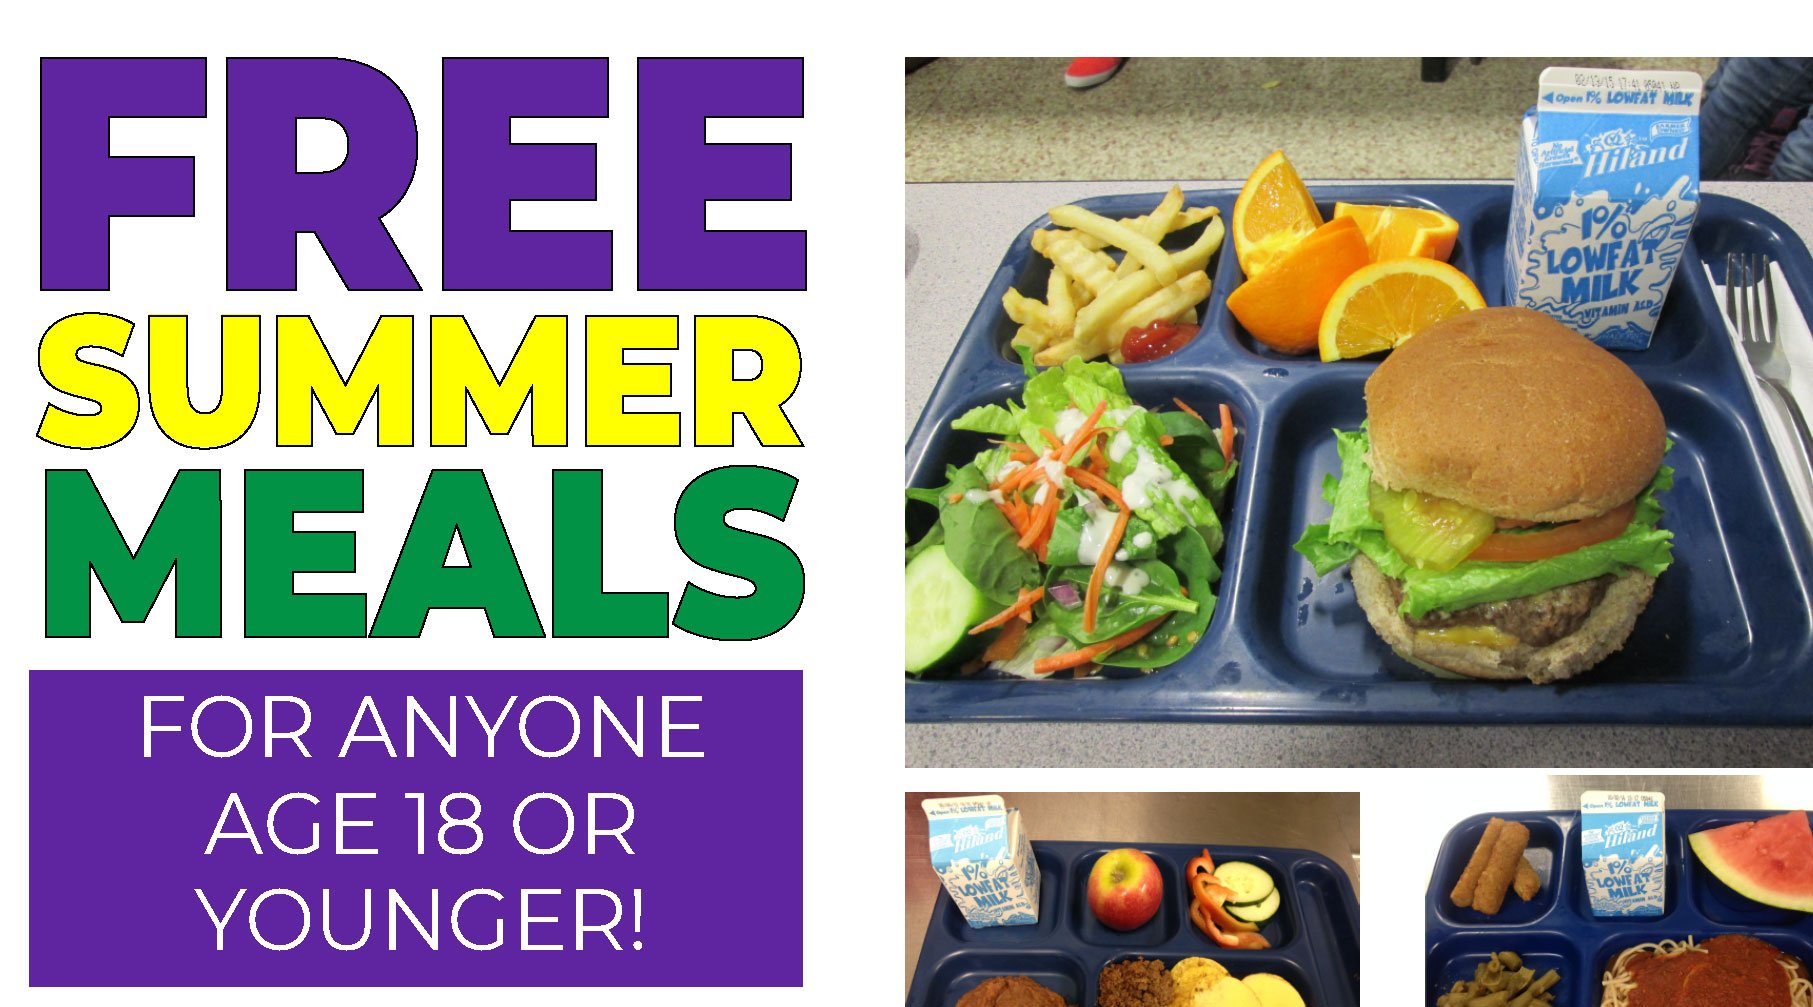 Fayetteville Public Schools to offer free meals to kids this summer